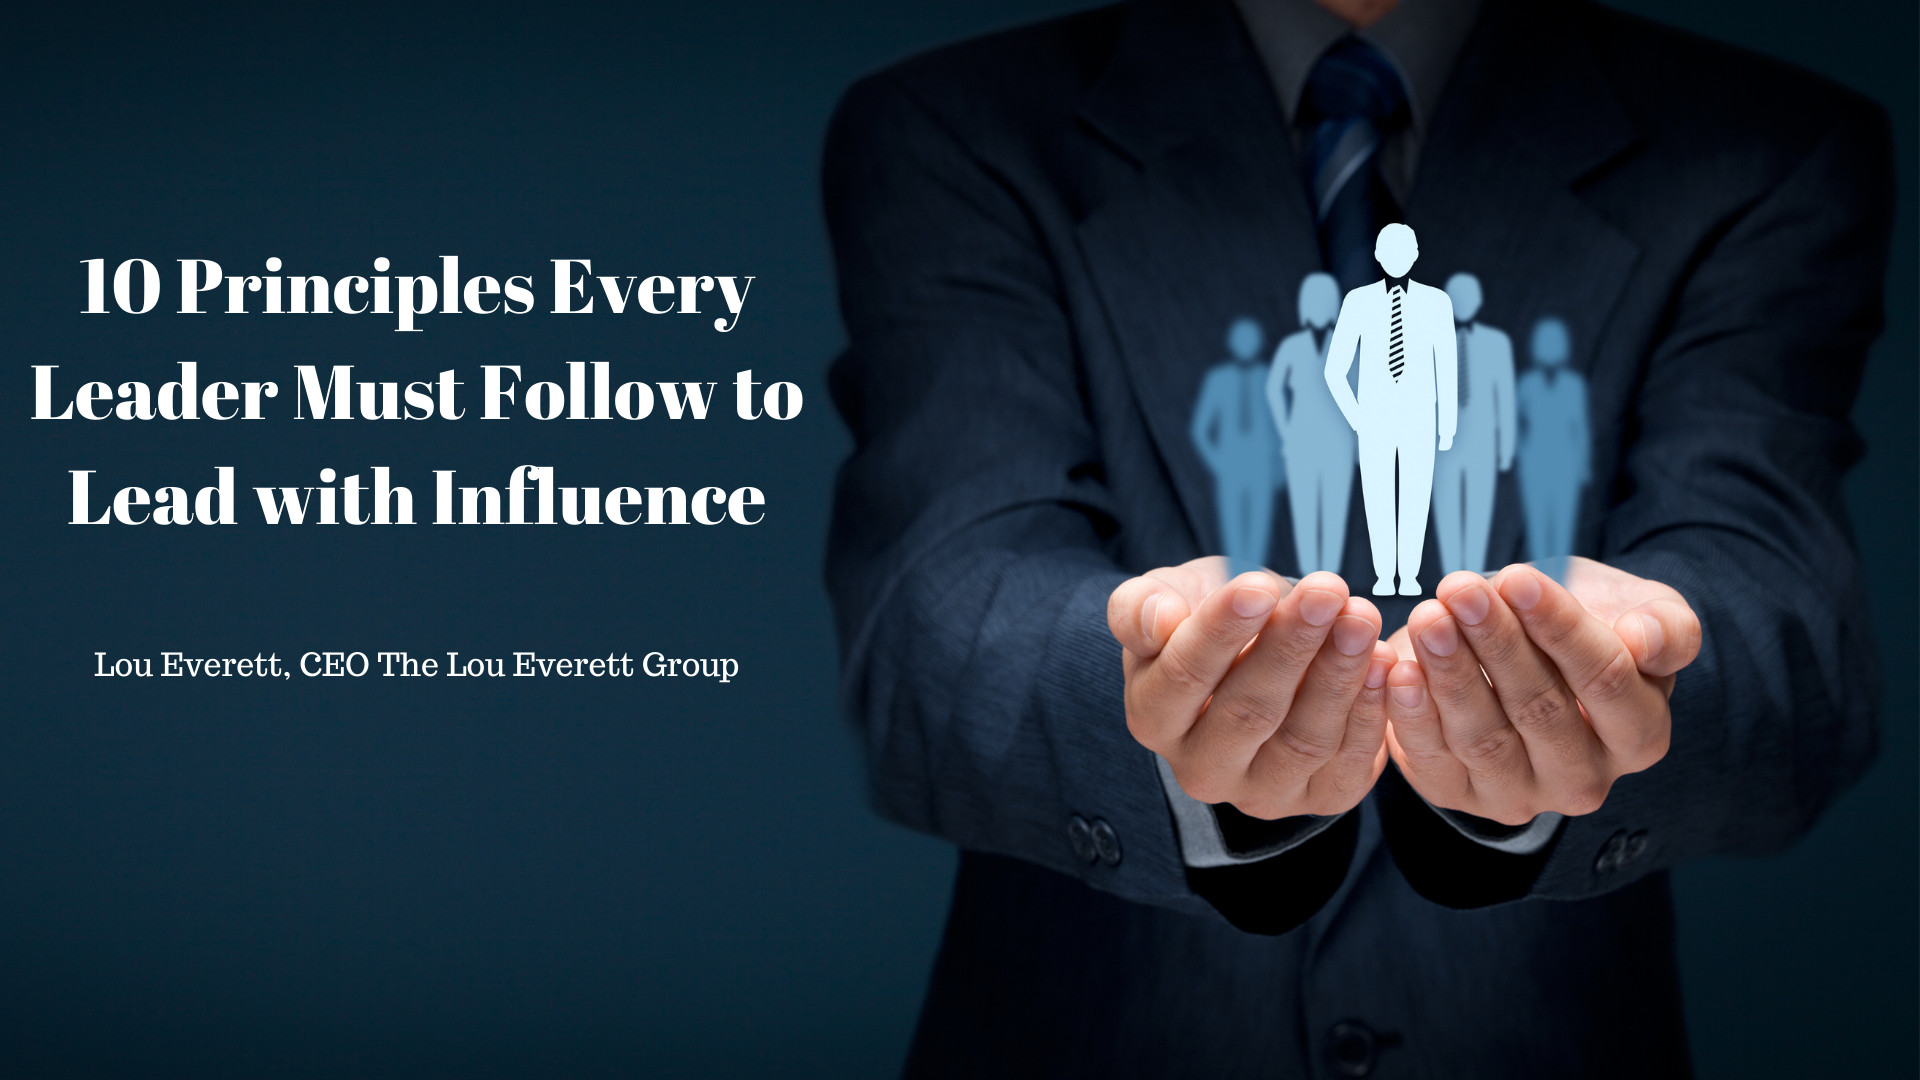 10 Principles Every Leader Must Follow to Lead with Influence